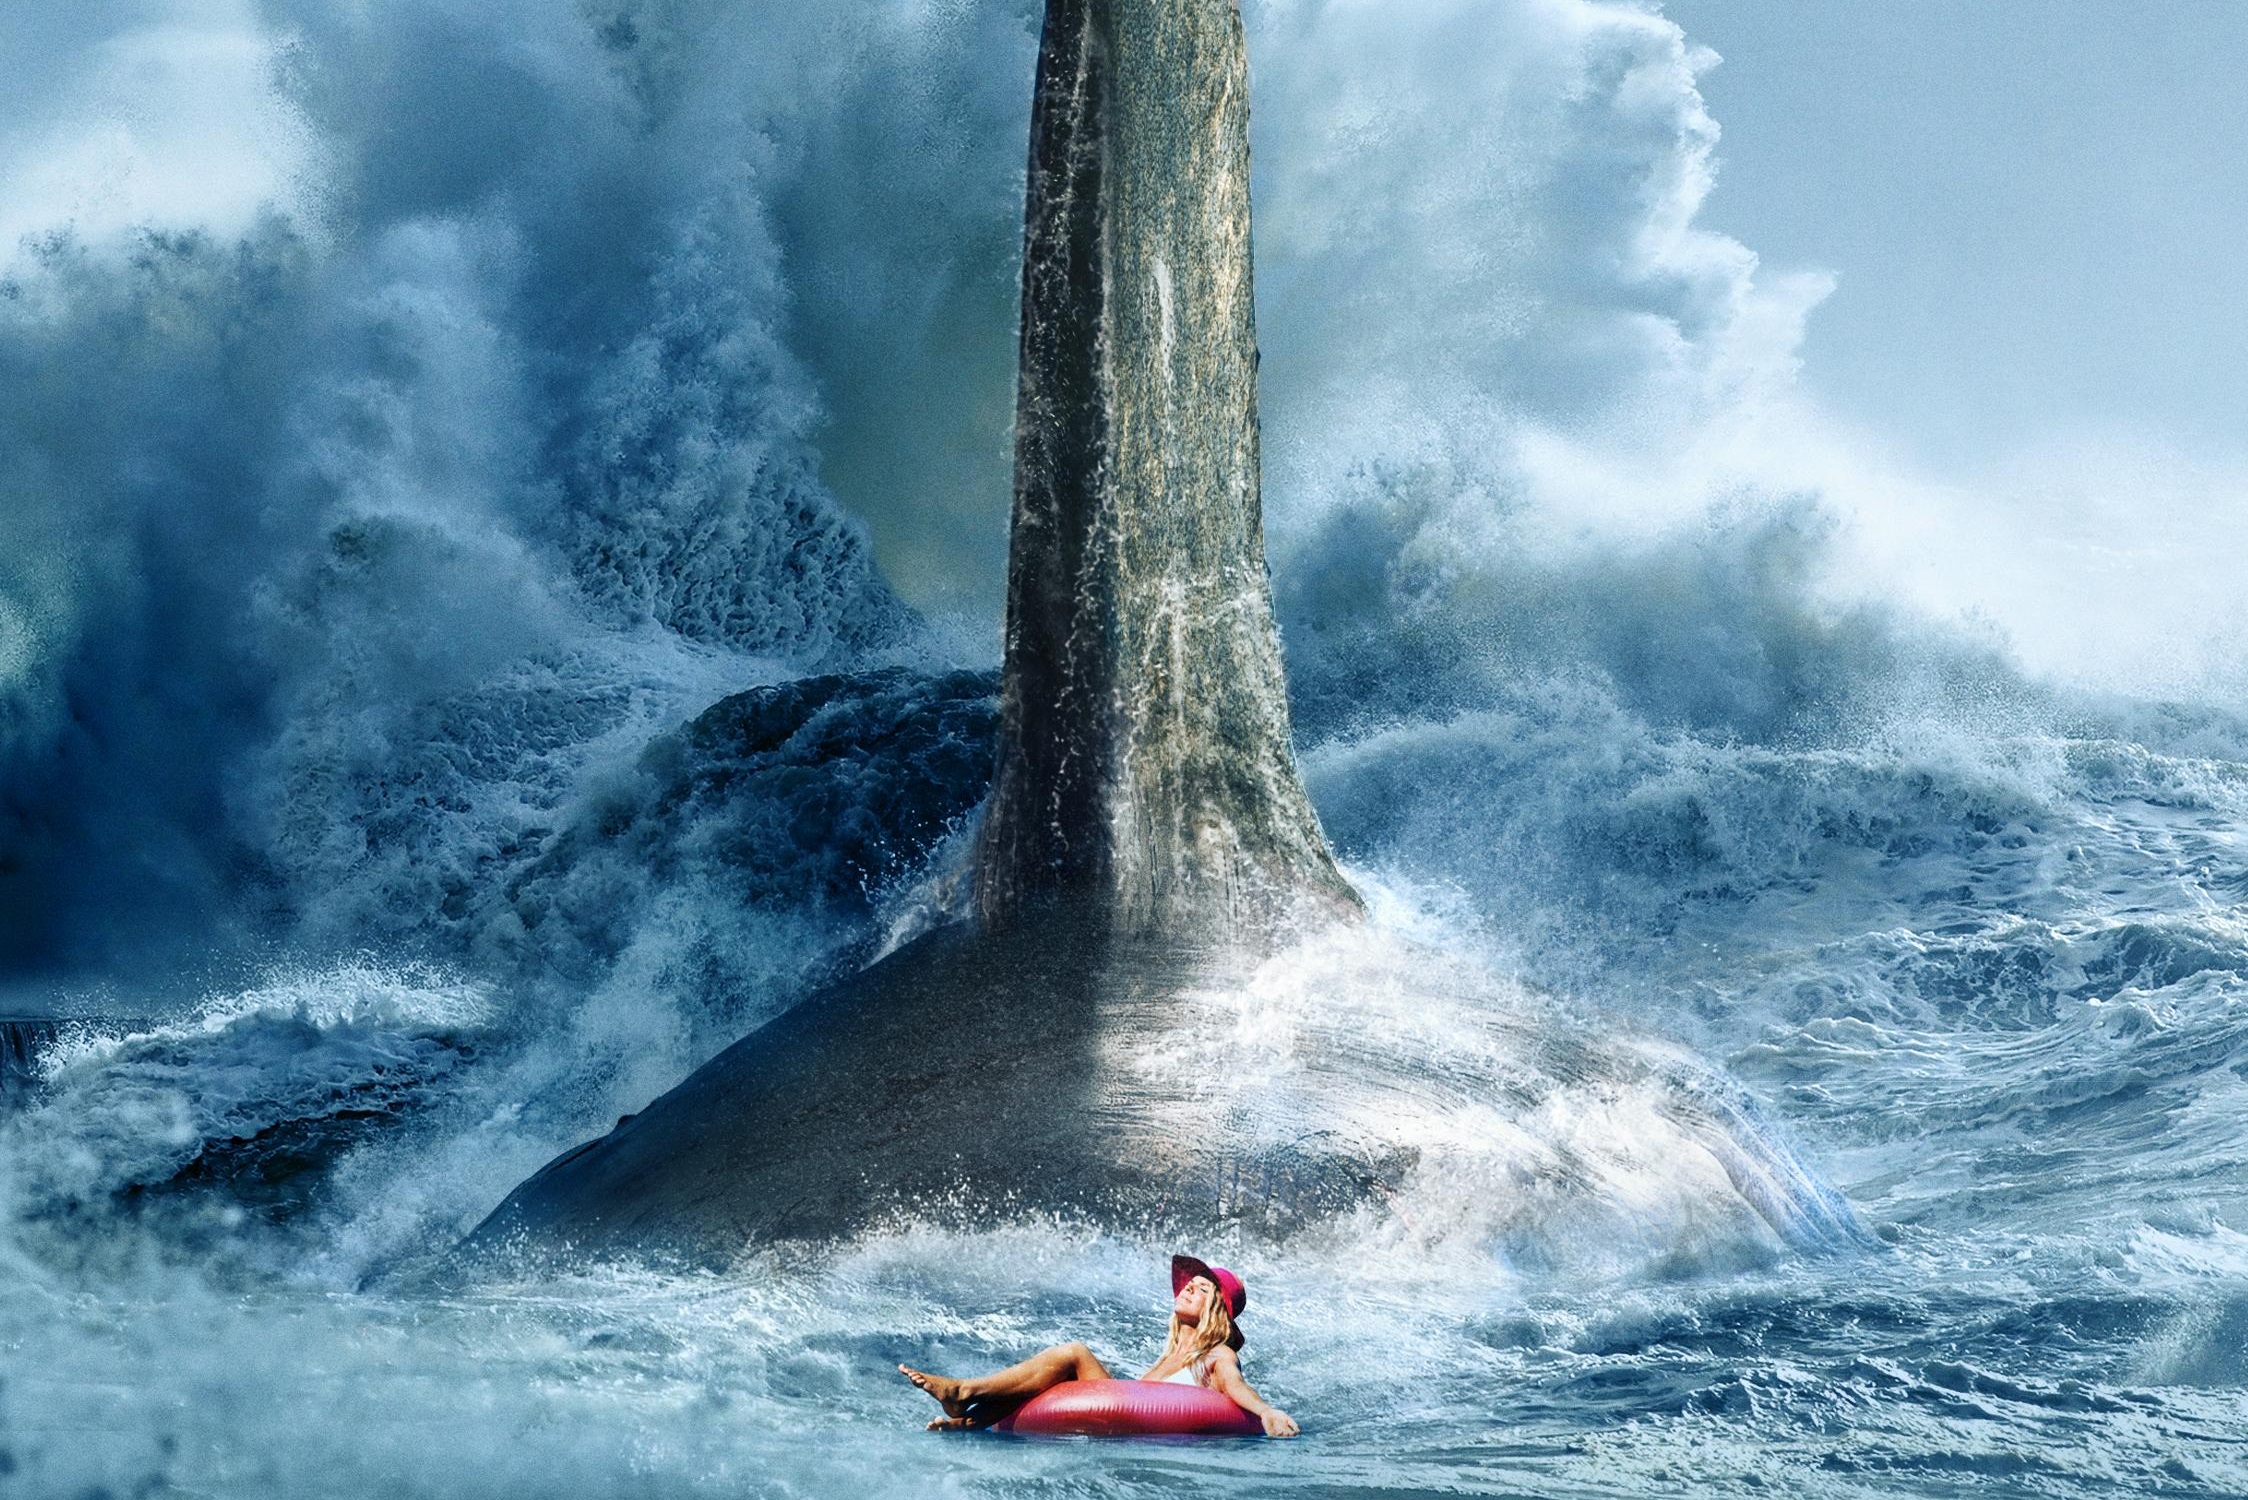 Movie The Meg HD Wallpaper | Background Image